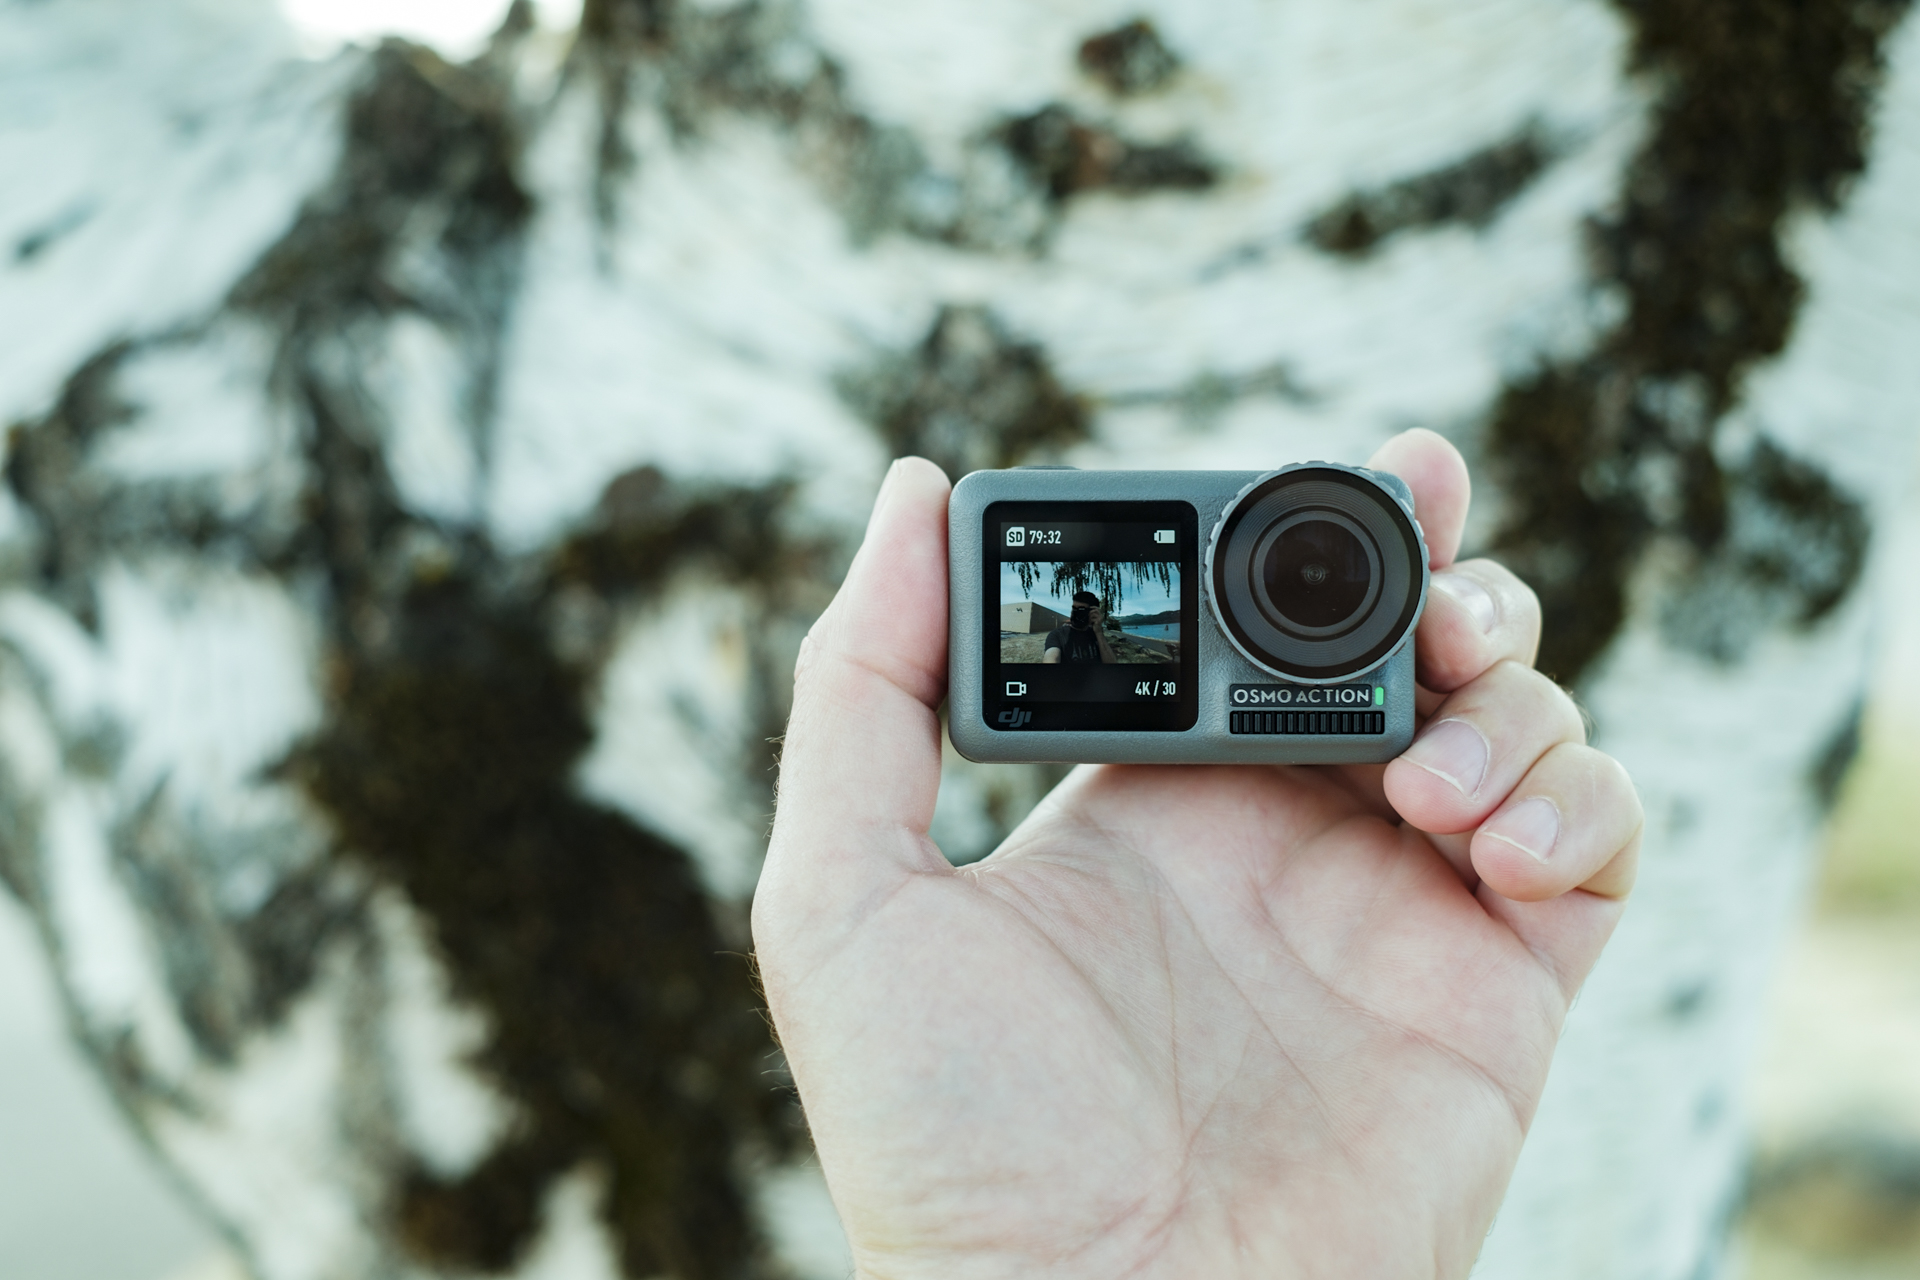 DJI Osmo Action 4 Reviews, Pros and Cons